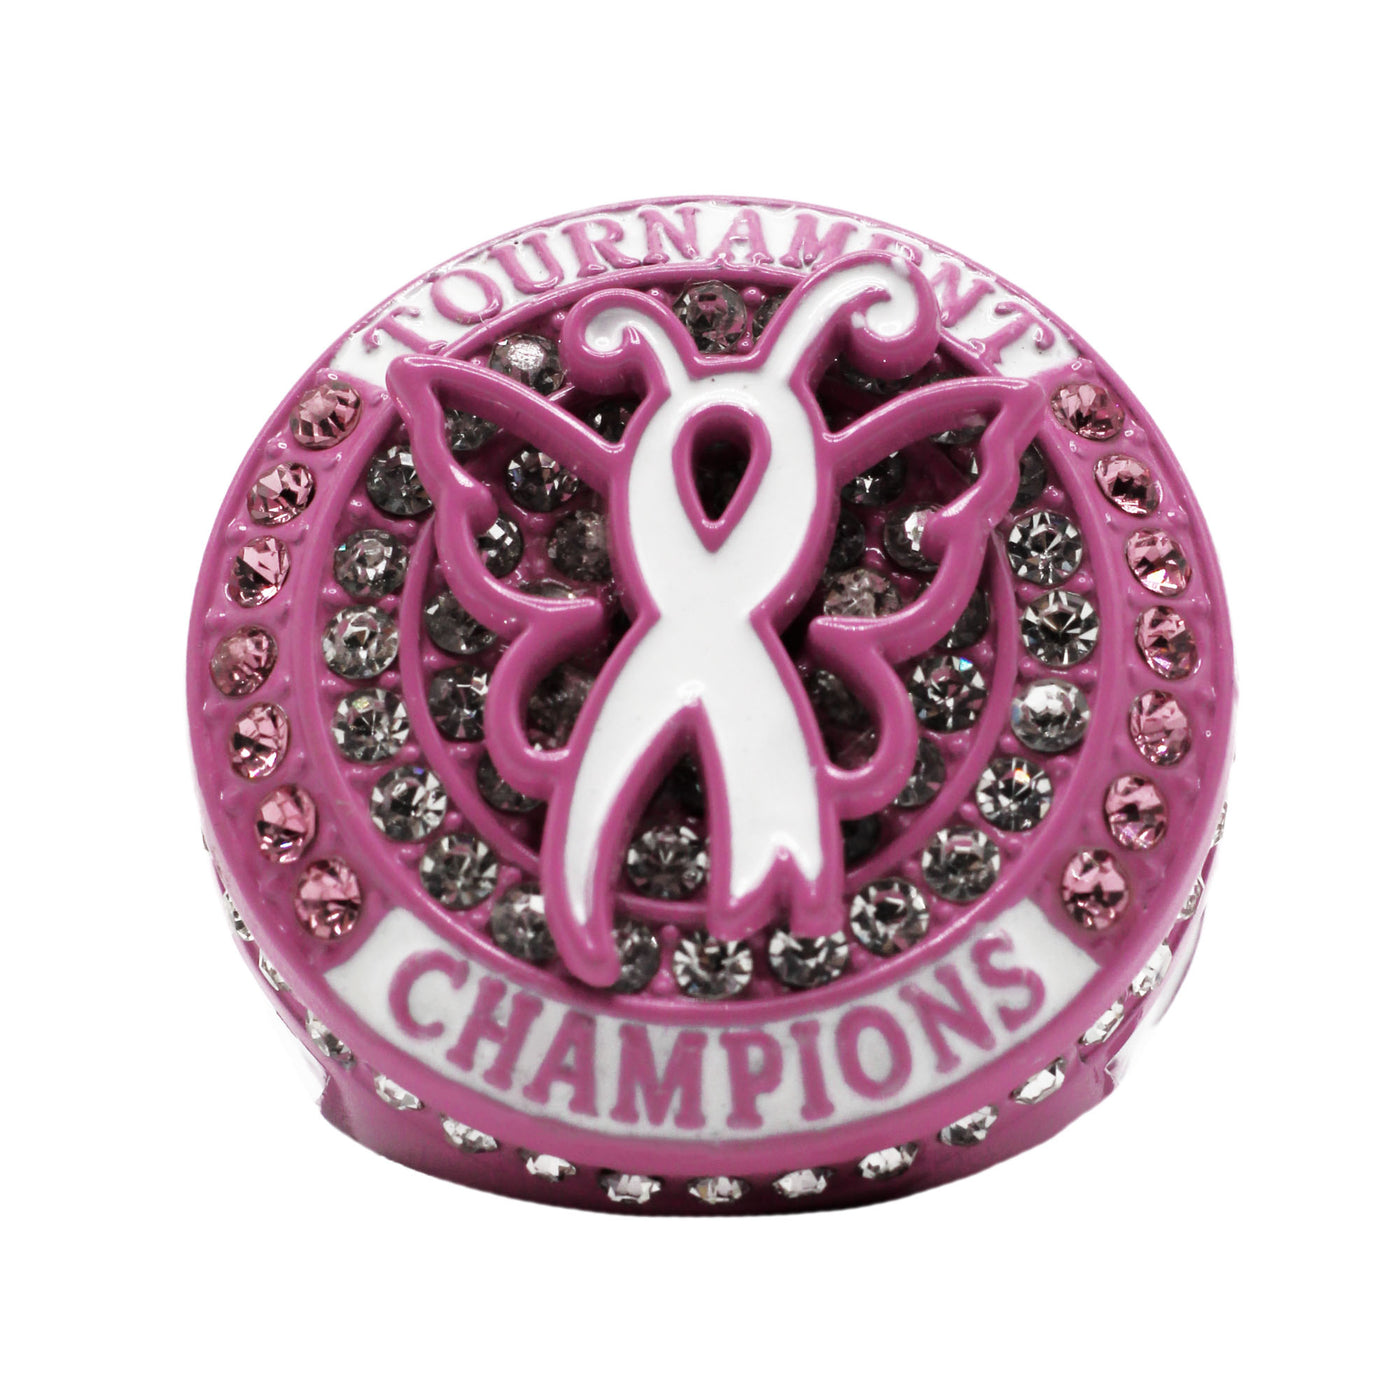 BREAST CANCER TOURNAMENT CHAMPIONS RING